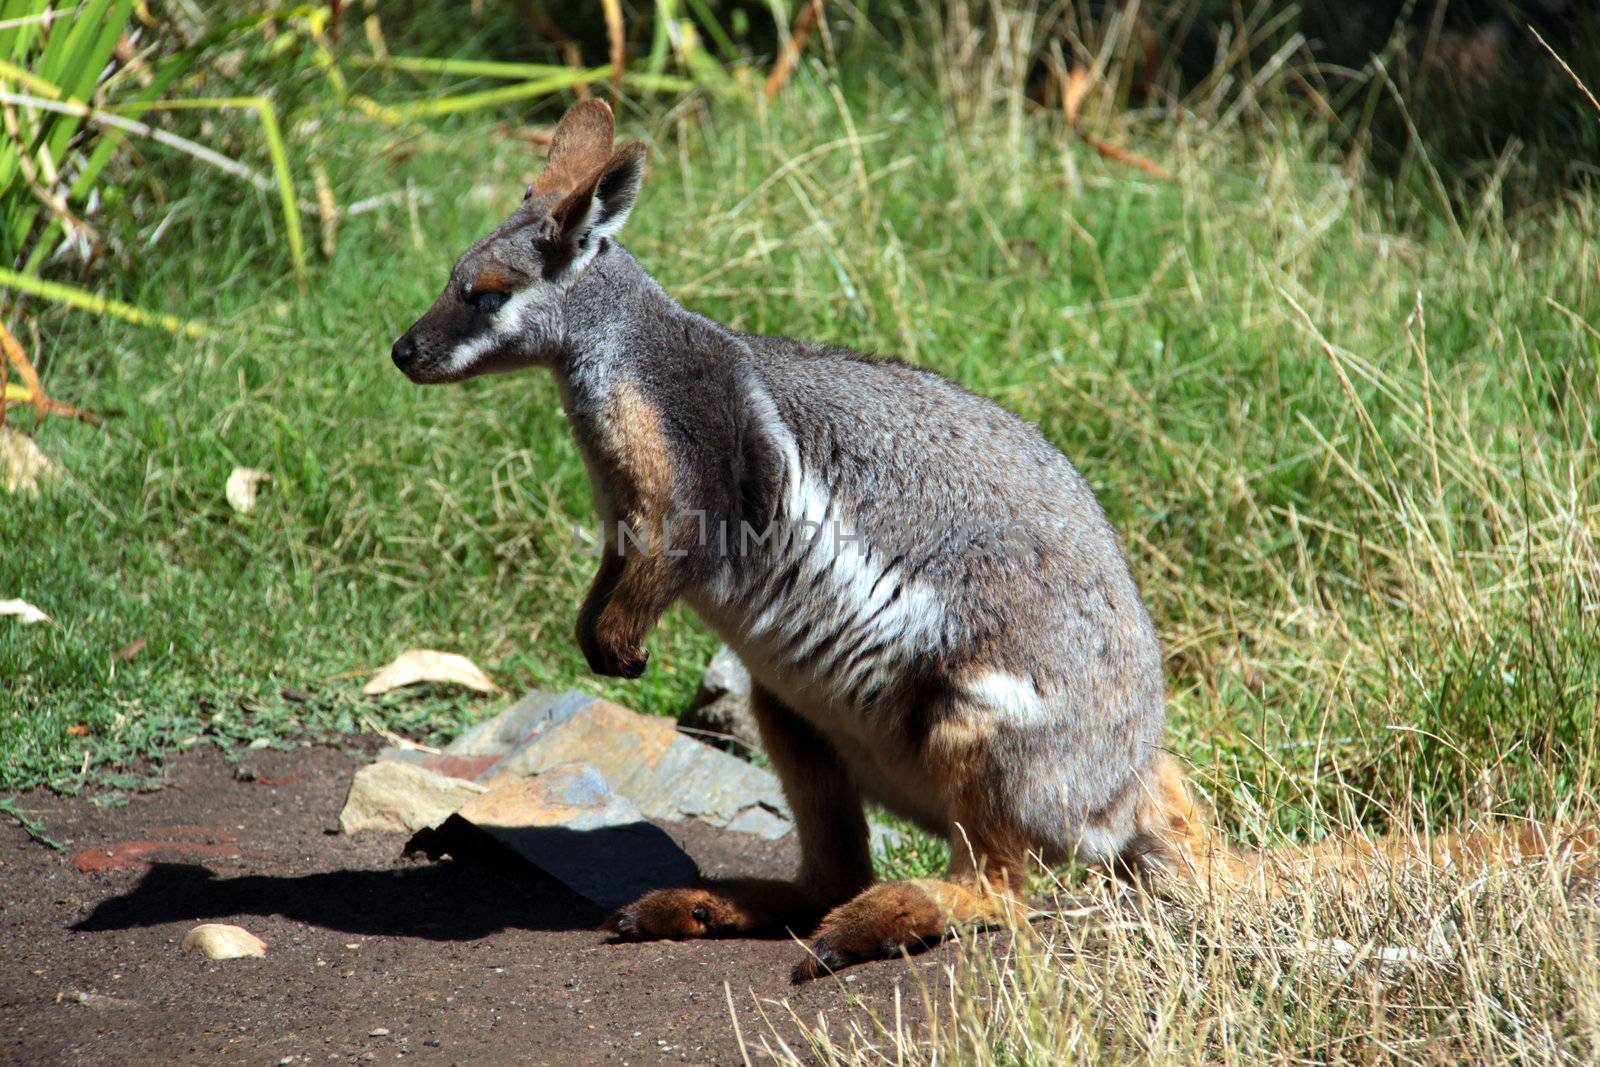 Yellow-Footed Rock-Wallaby in Long Green Grass. Native Australian Animal. Petrogale xanthopus.